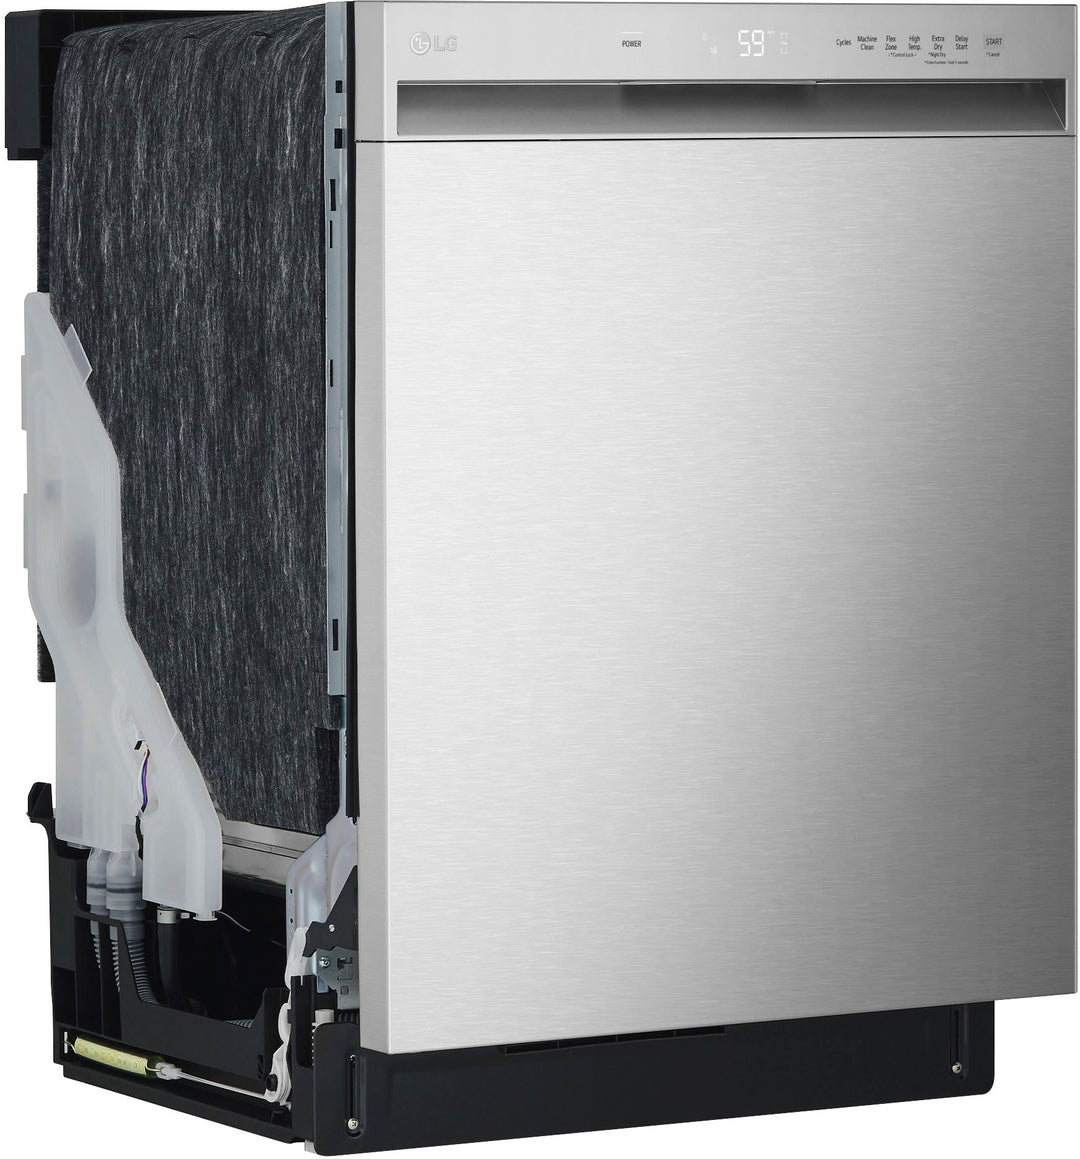 LG - 24" Front-Control Built-In Dishwasher with Stainless Steel Tub, QuadWash, 50 dBa - Stainless steel_10